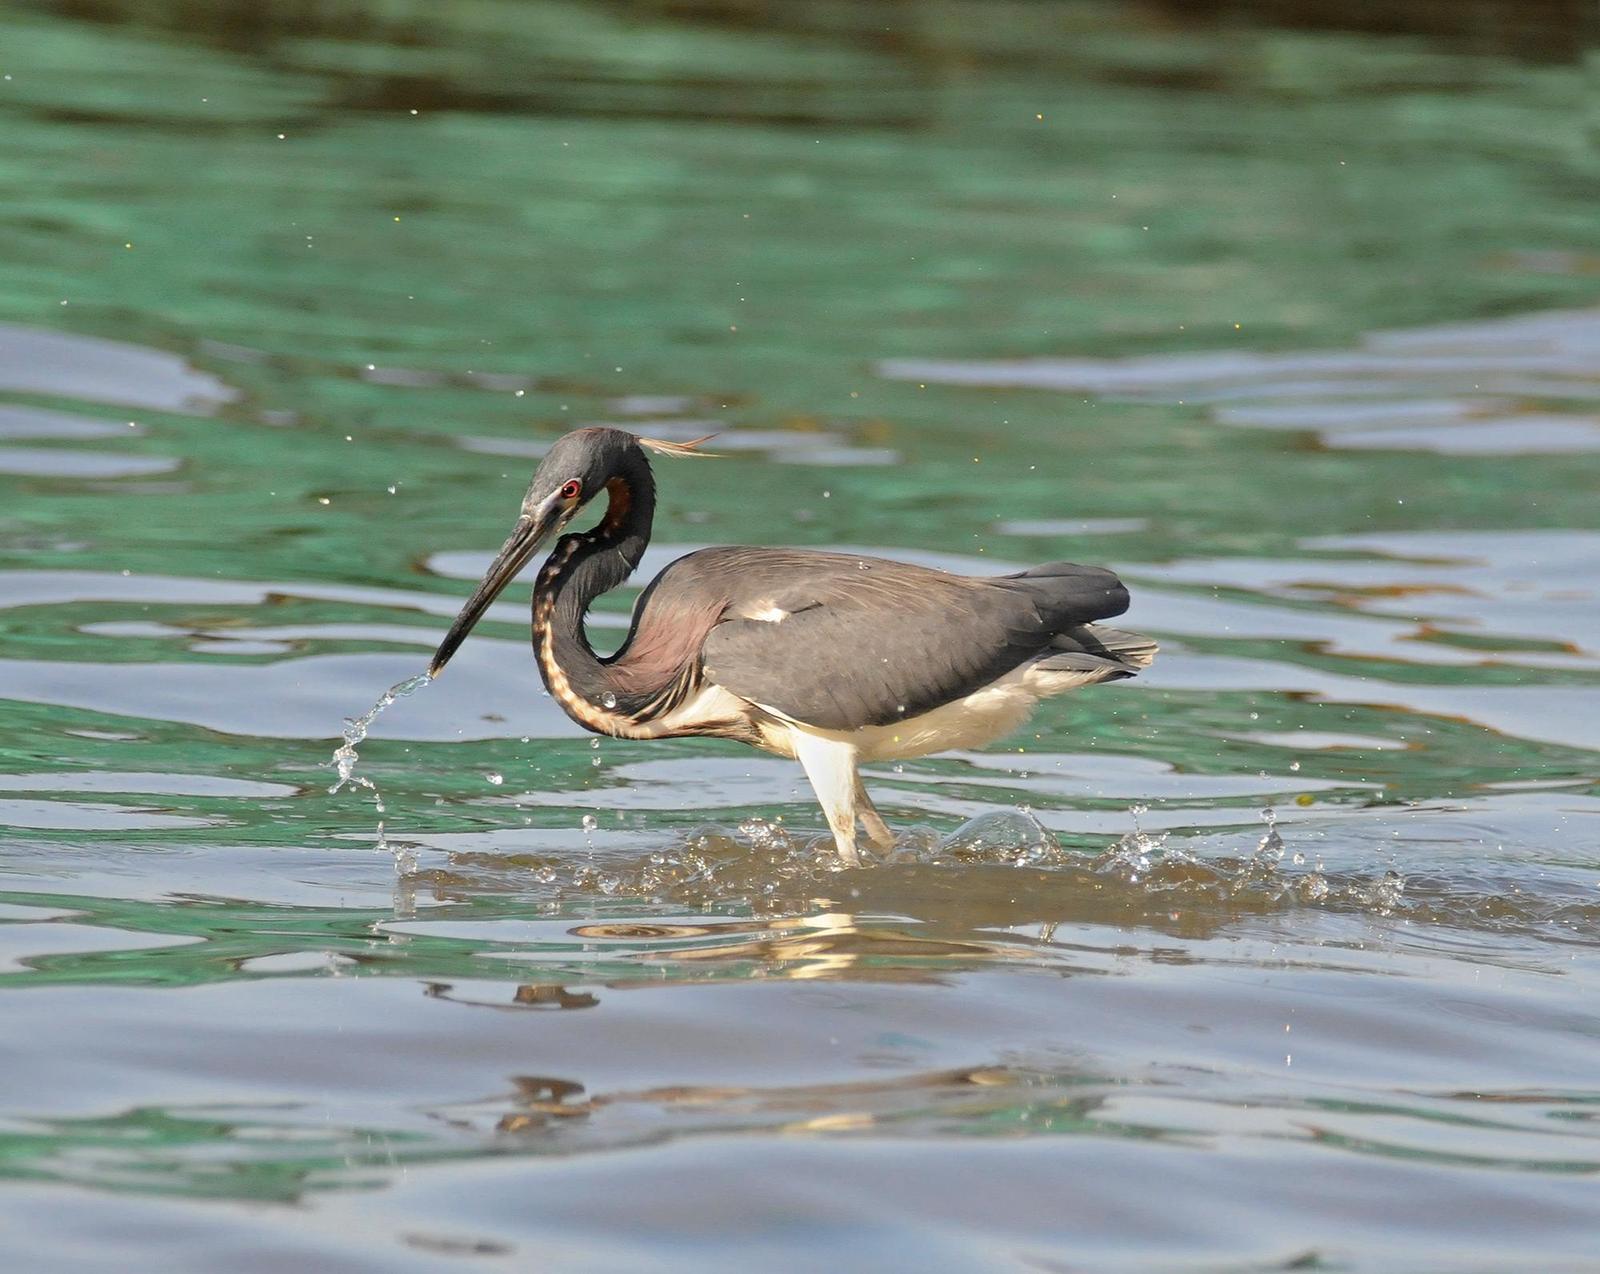 Tricolored Heron Photo by Steven Mlodinow